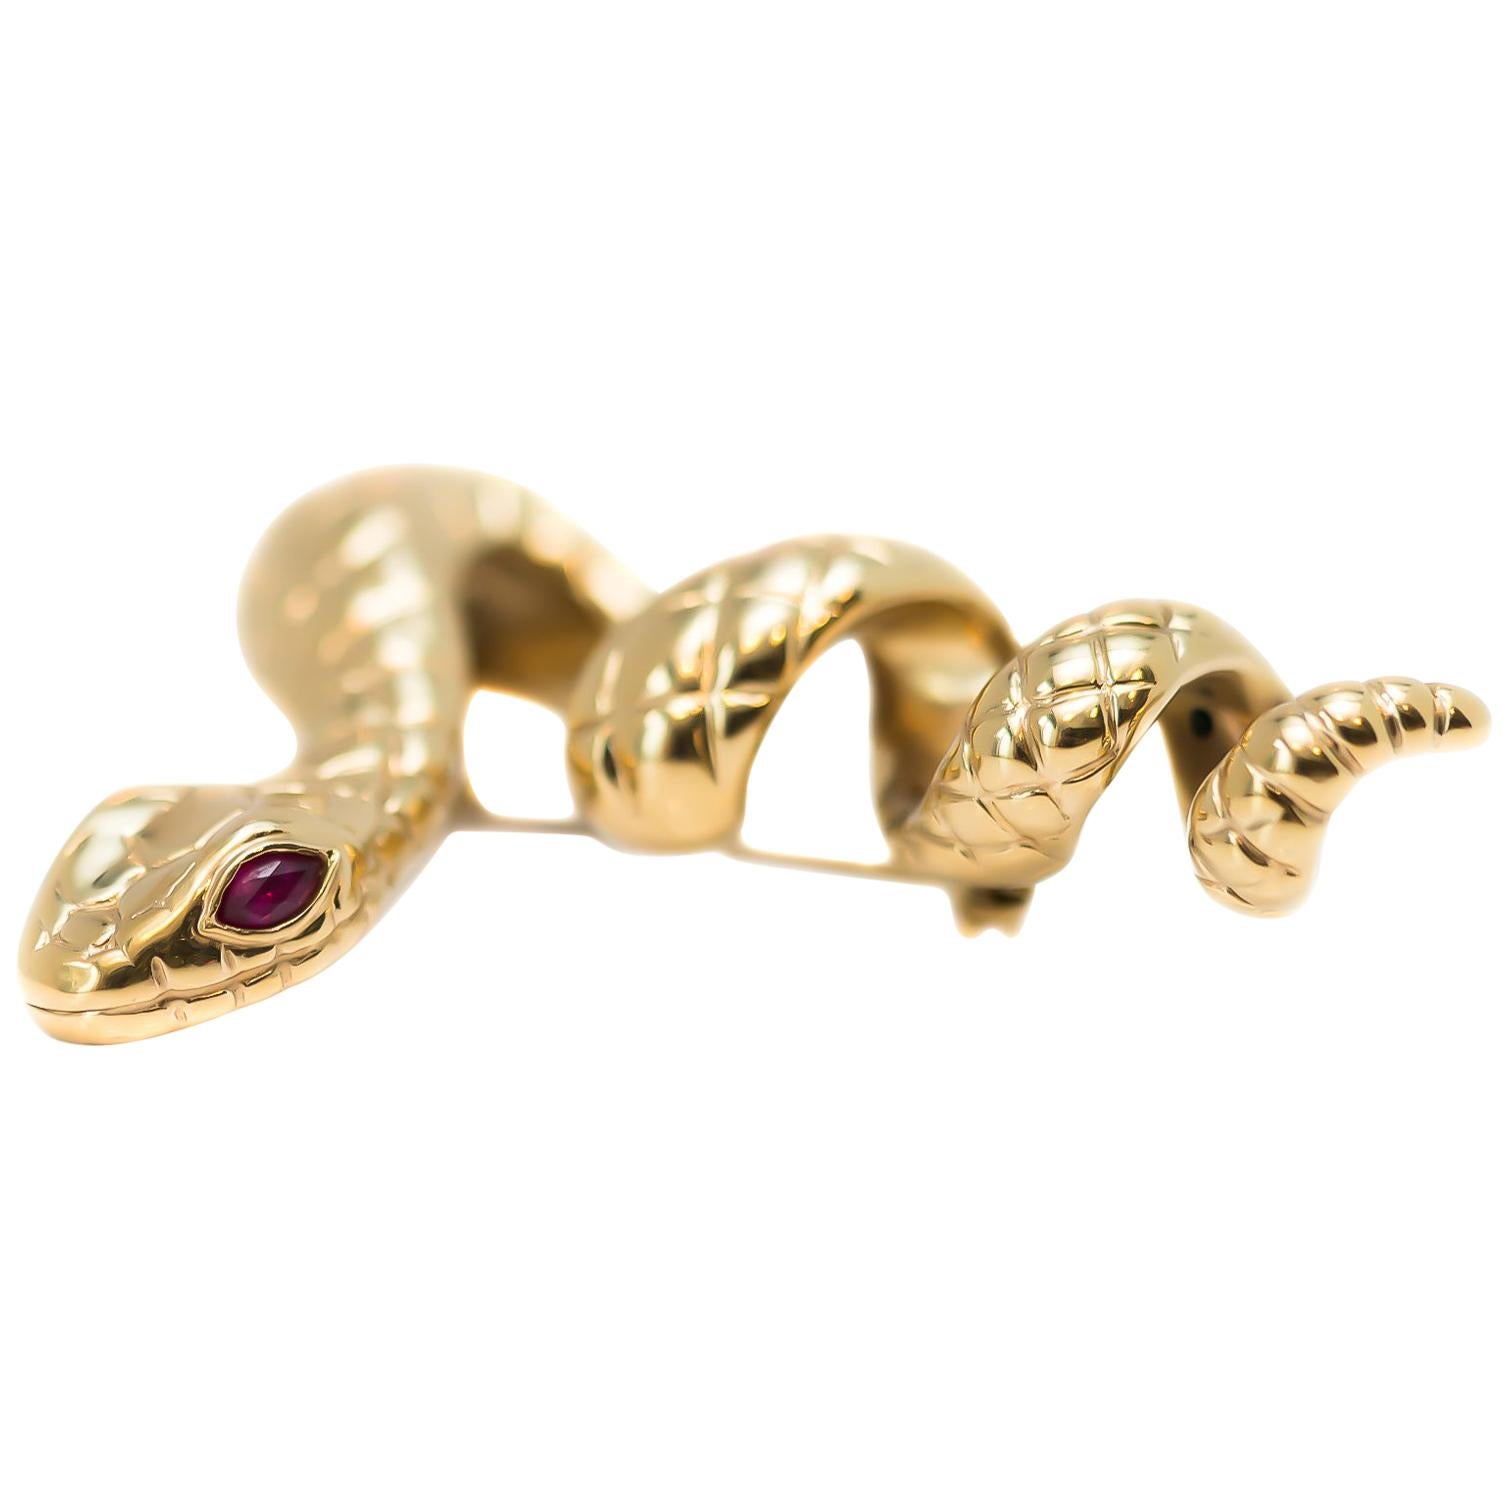 1950s Serpent Pin, Snake Brooch in 14 Karat Yellow Gold with Rubies